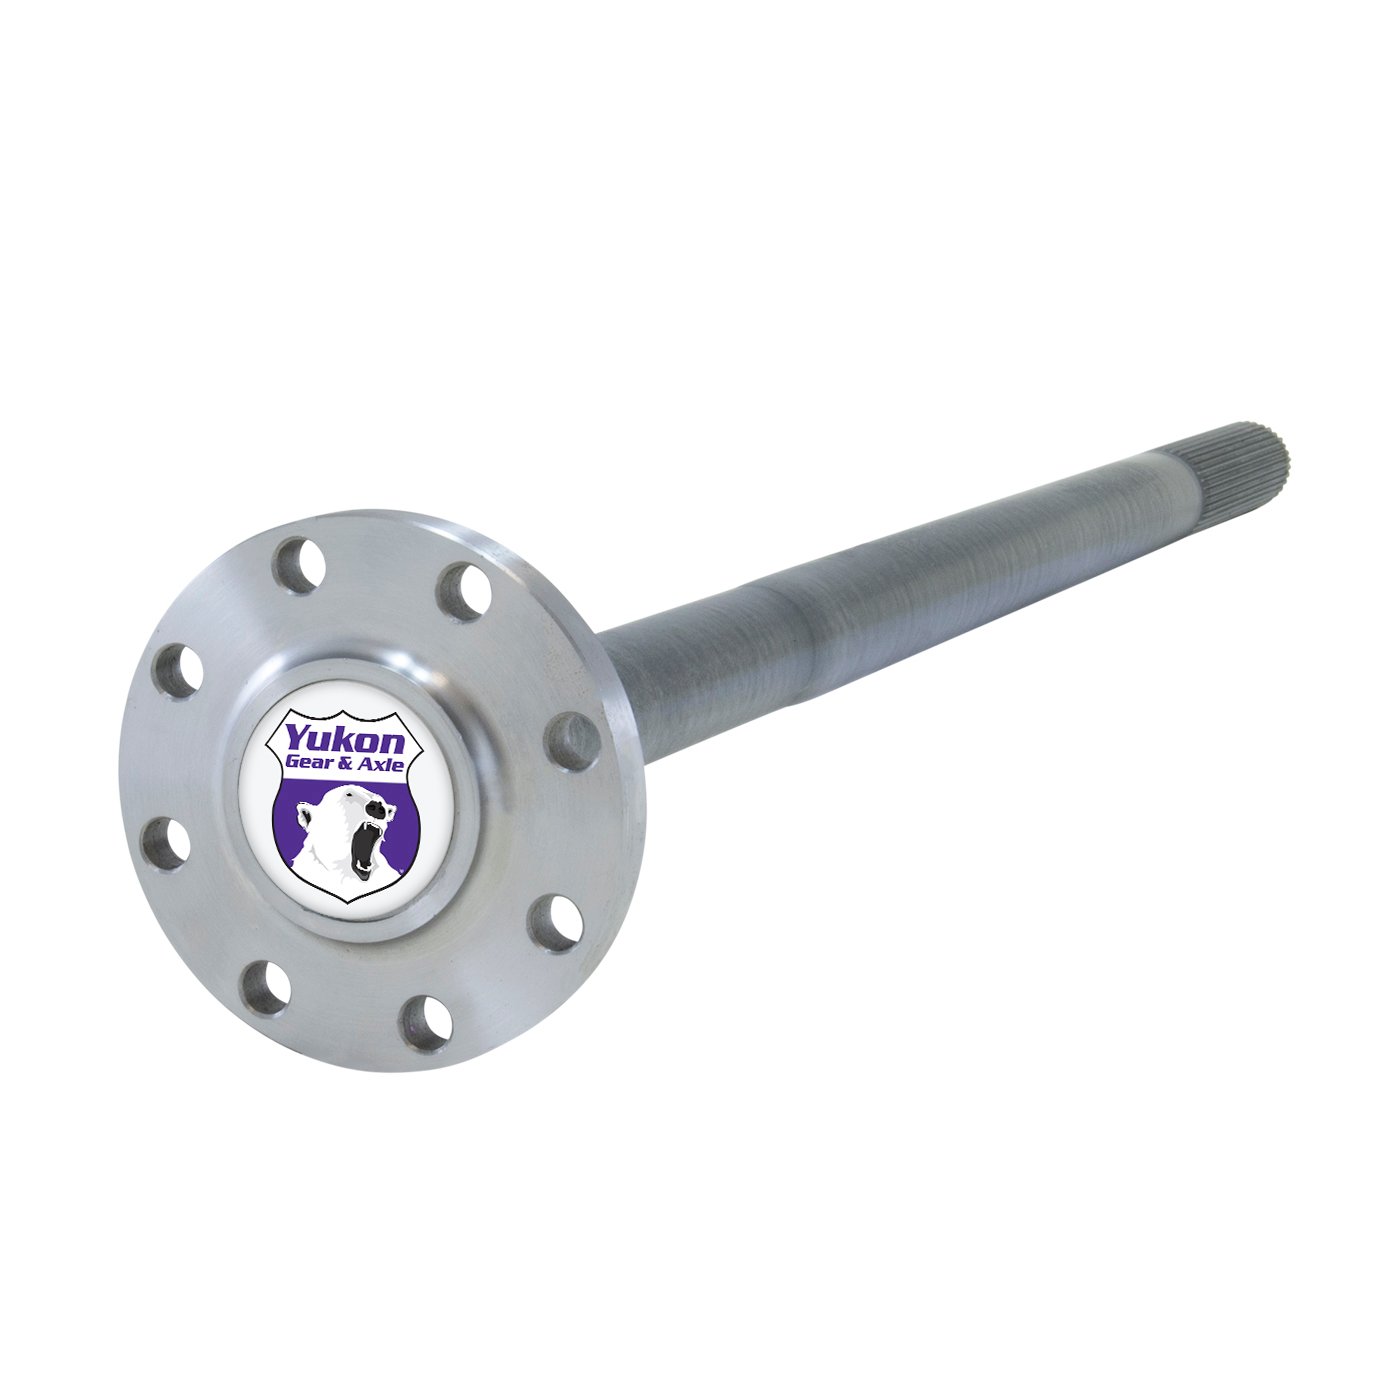 1541H Alloy Replacement Rear Axle For Dana 60, 70, And 80, 35 Spline.